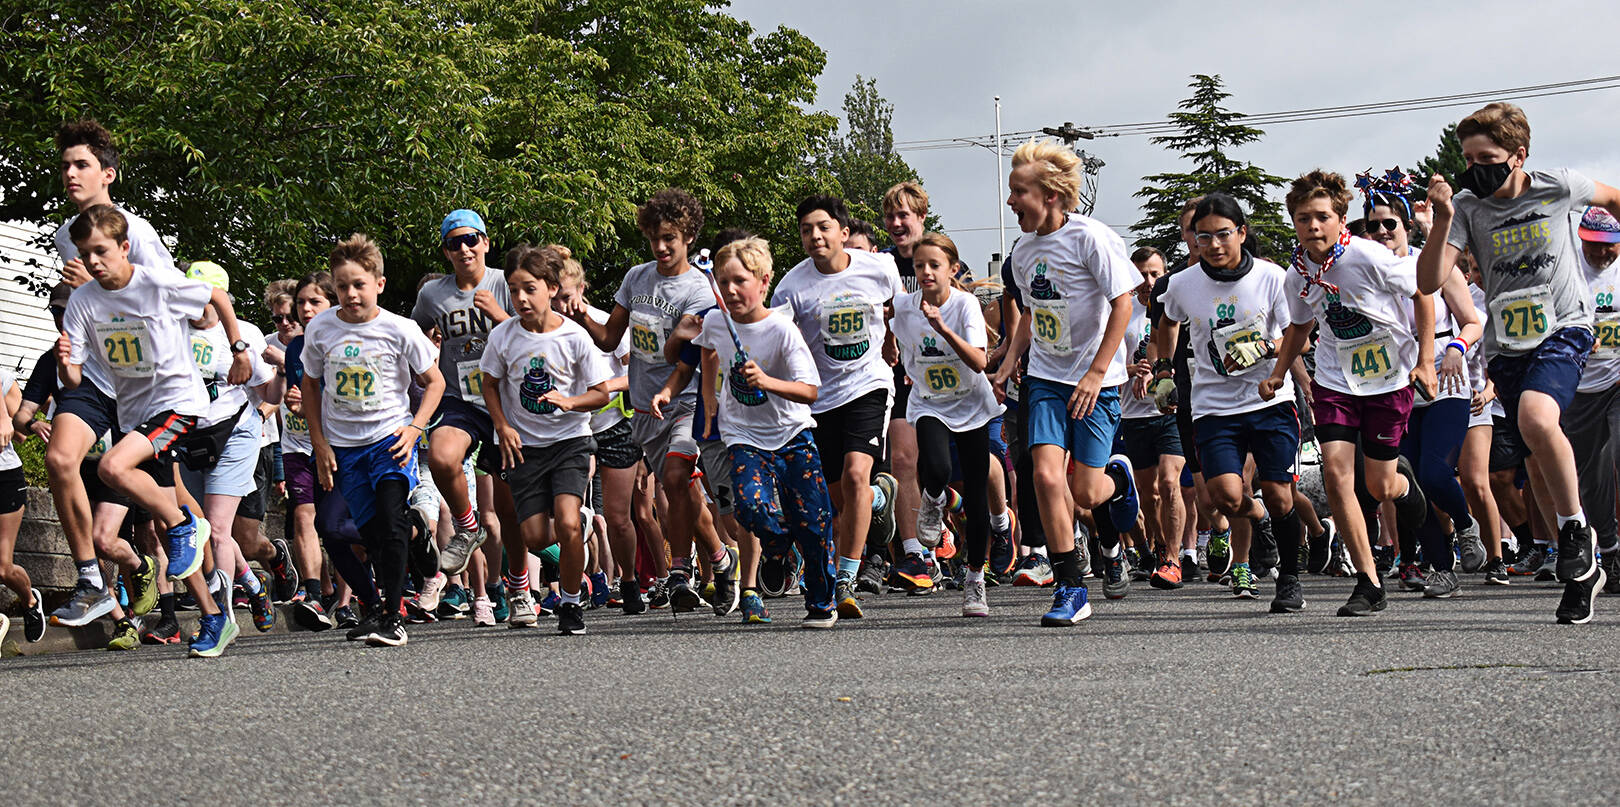 Children line up at the starting line for the packed 5K fun run on Bainbridge Island July 4.